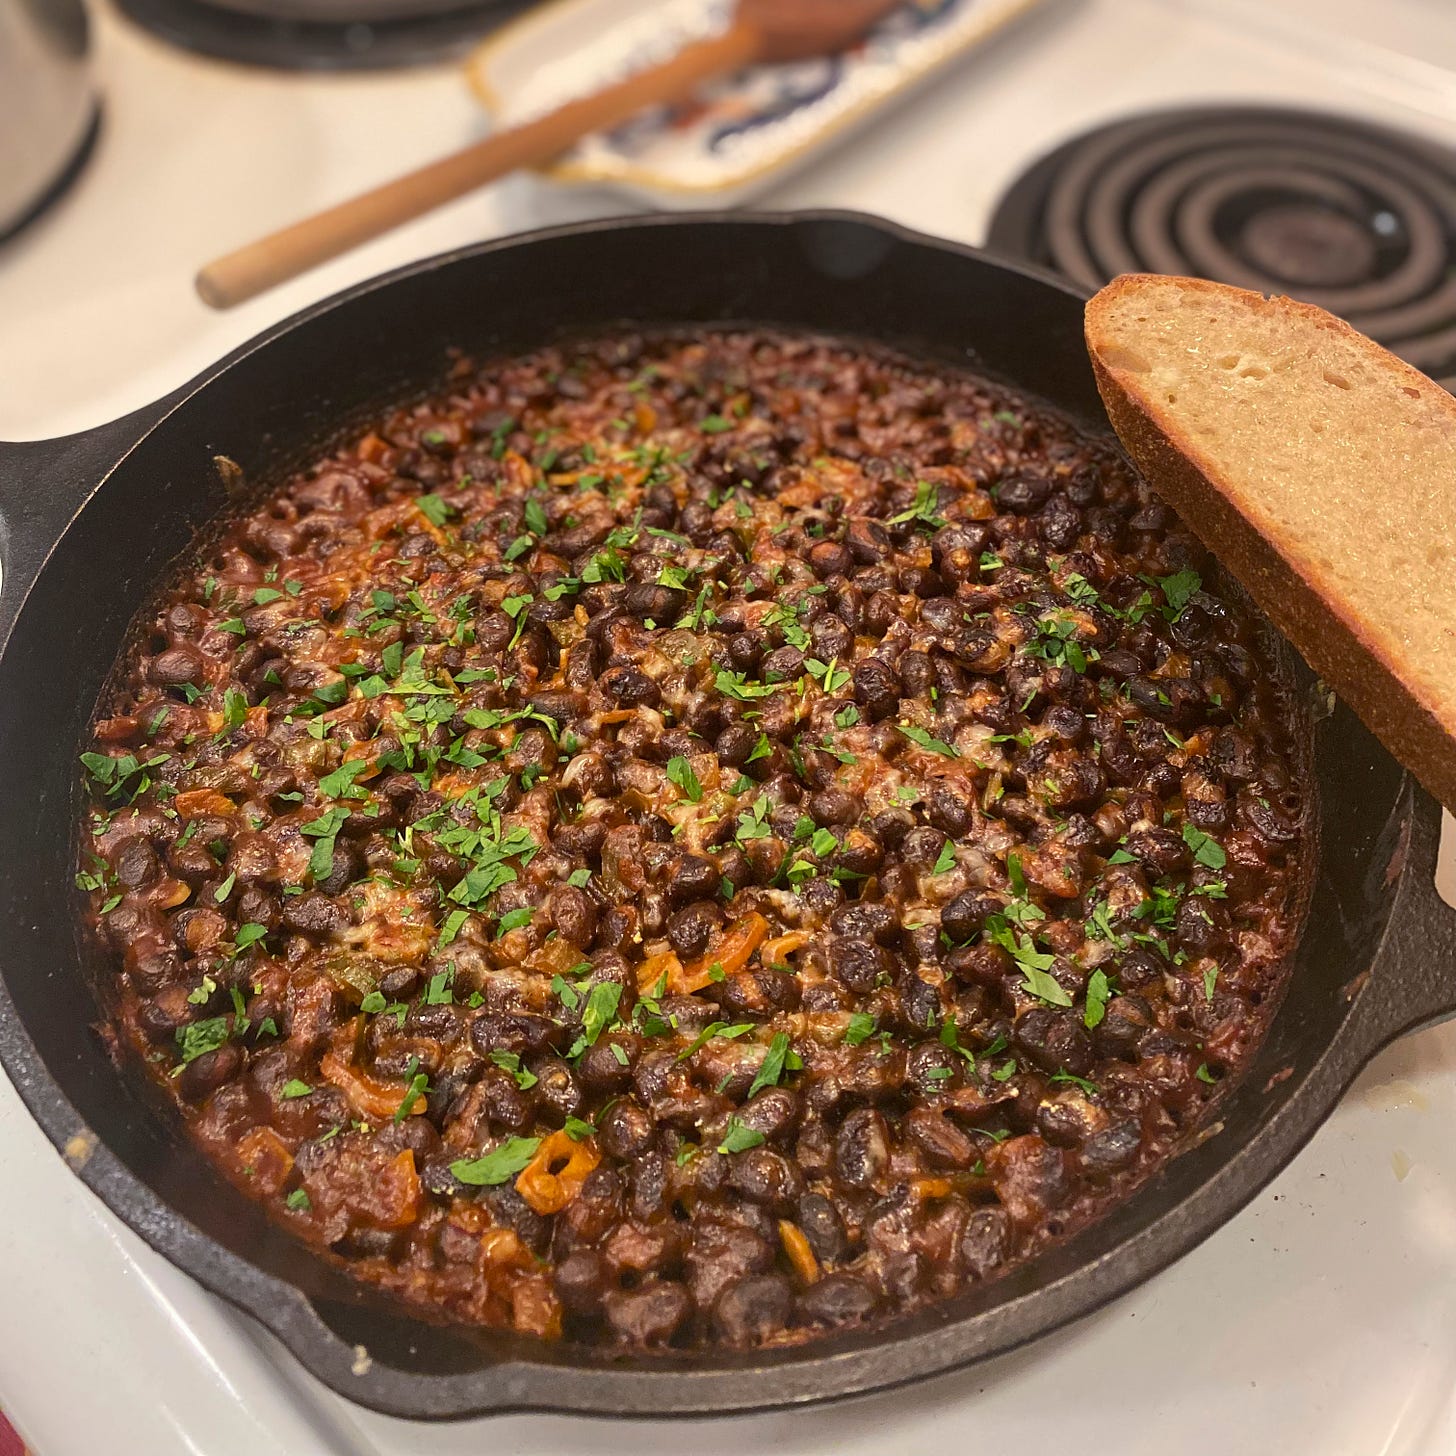 A cast iron filled with black beans baked in a tomatoey sauce with cheese and parsley on top. A slice of sourdough rests at the edge of the pan.